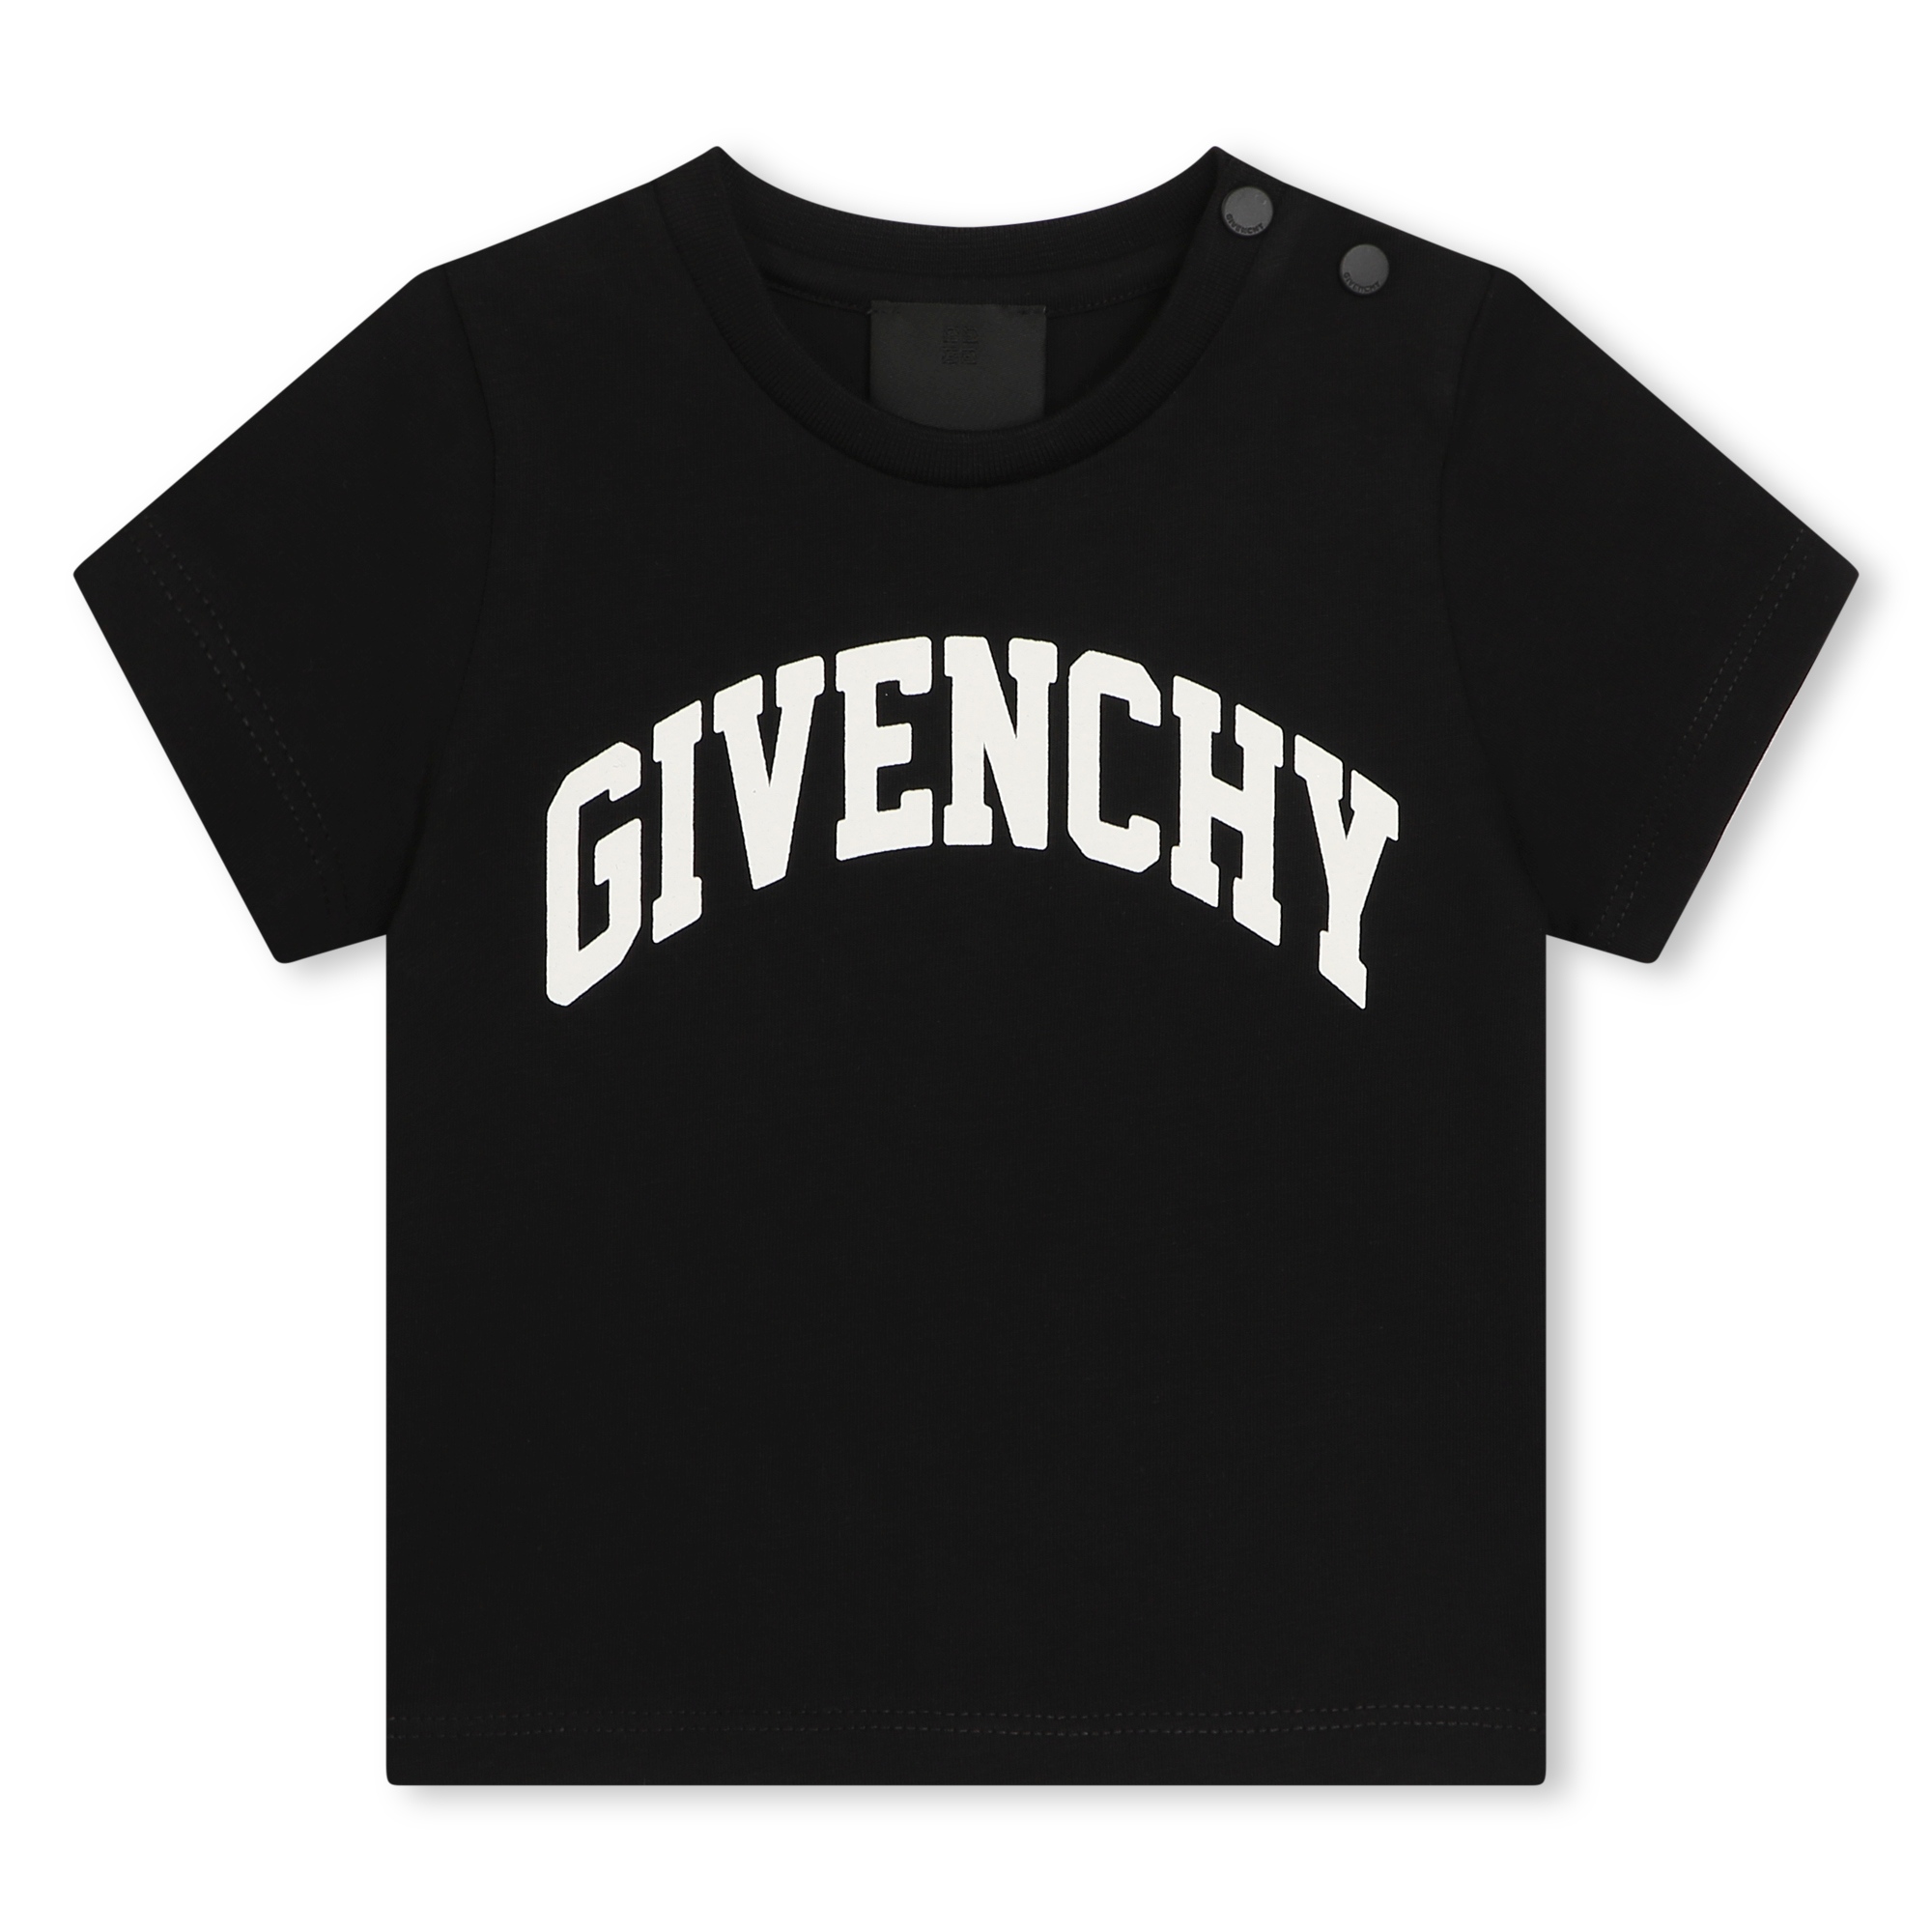 Cotton T-shirt with print GIVENCHY for BOY